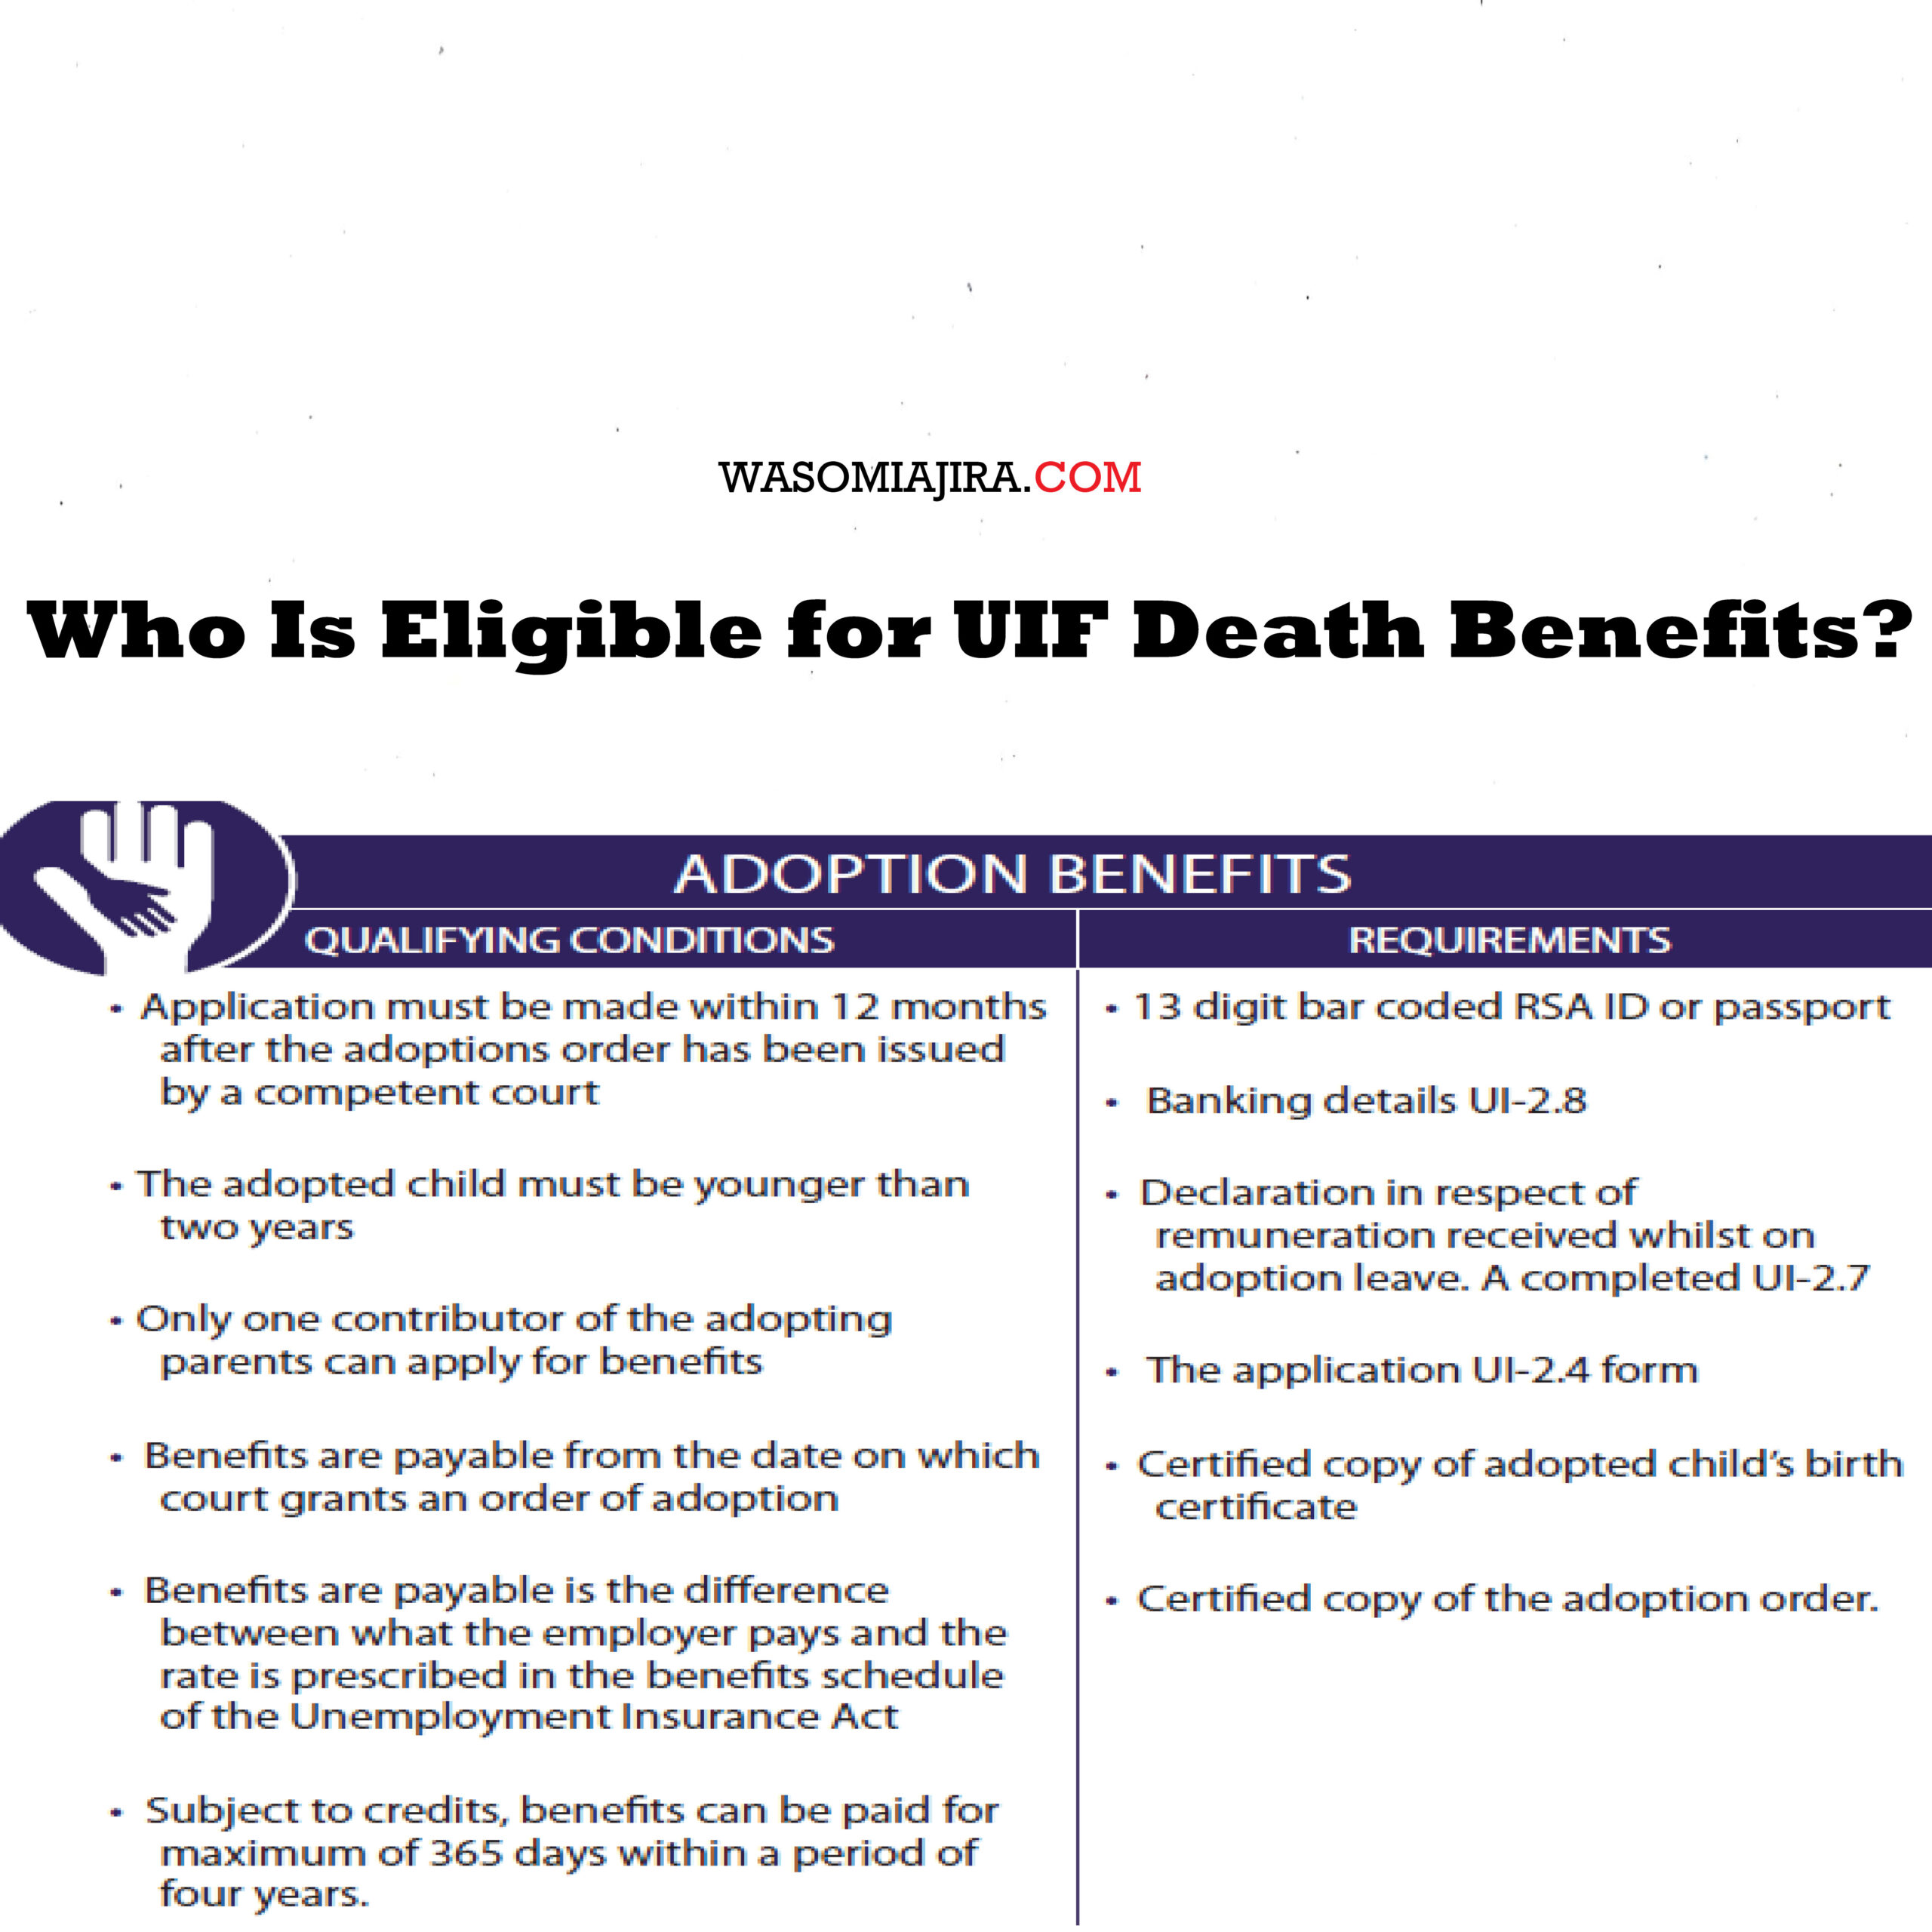 Who Is Eligible for UIF Death Benefits?